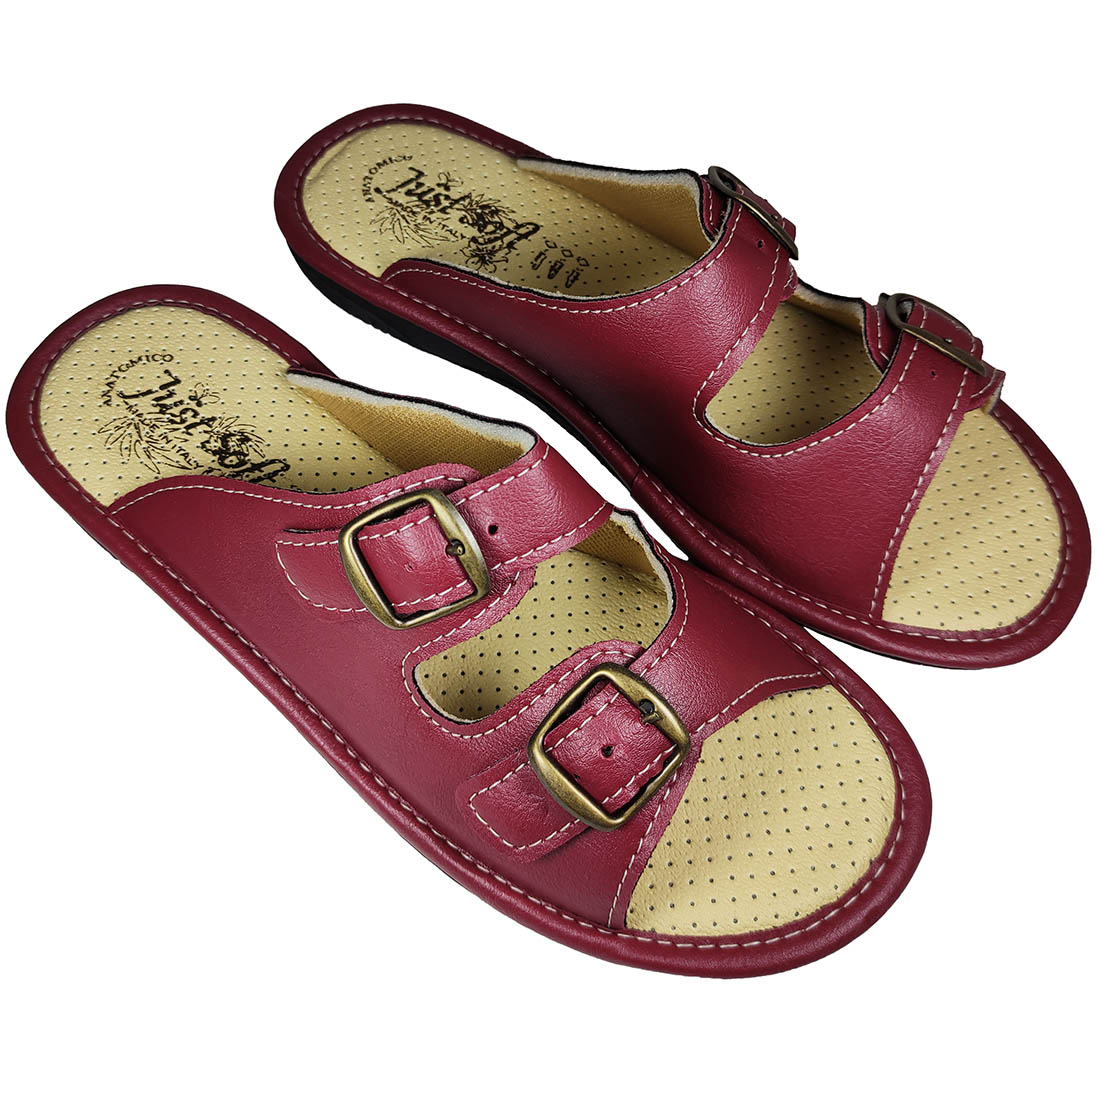 Italian Anatomical Slippers Just Soft 1640 Bordeaux